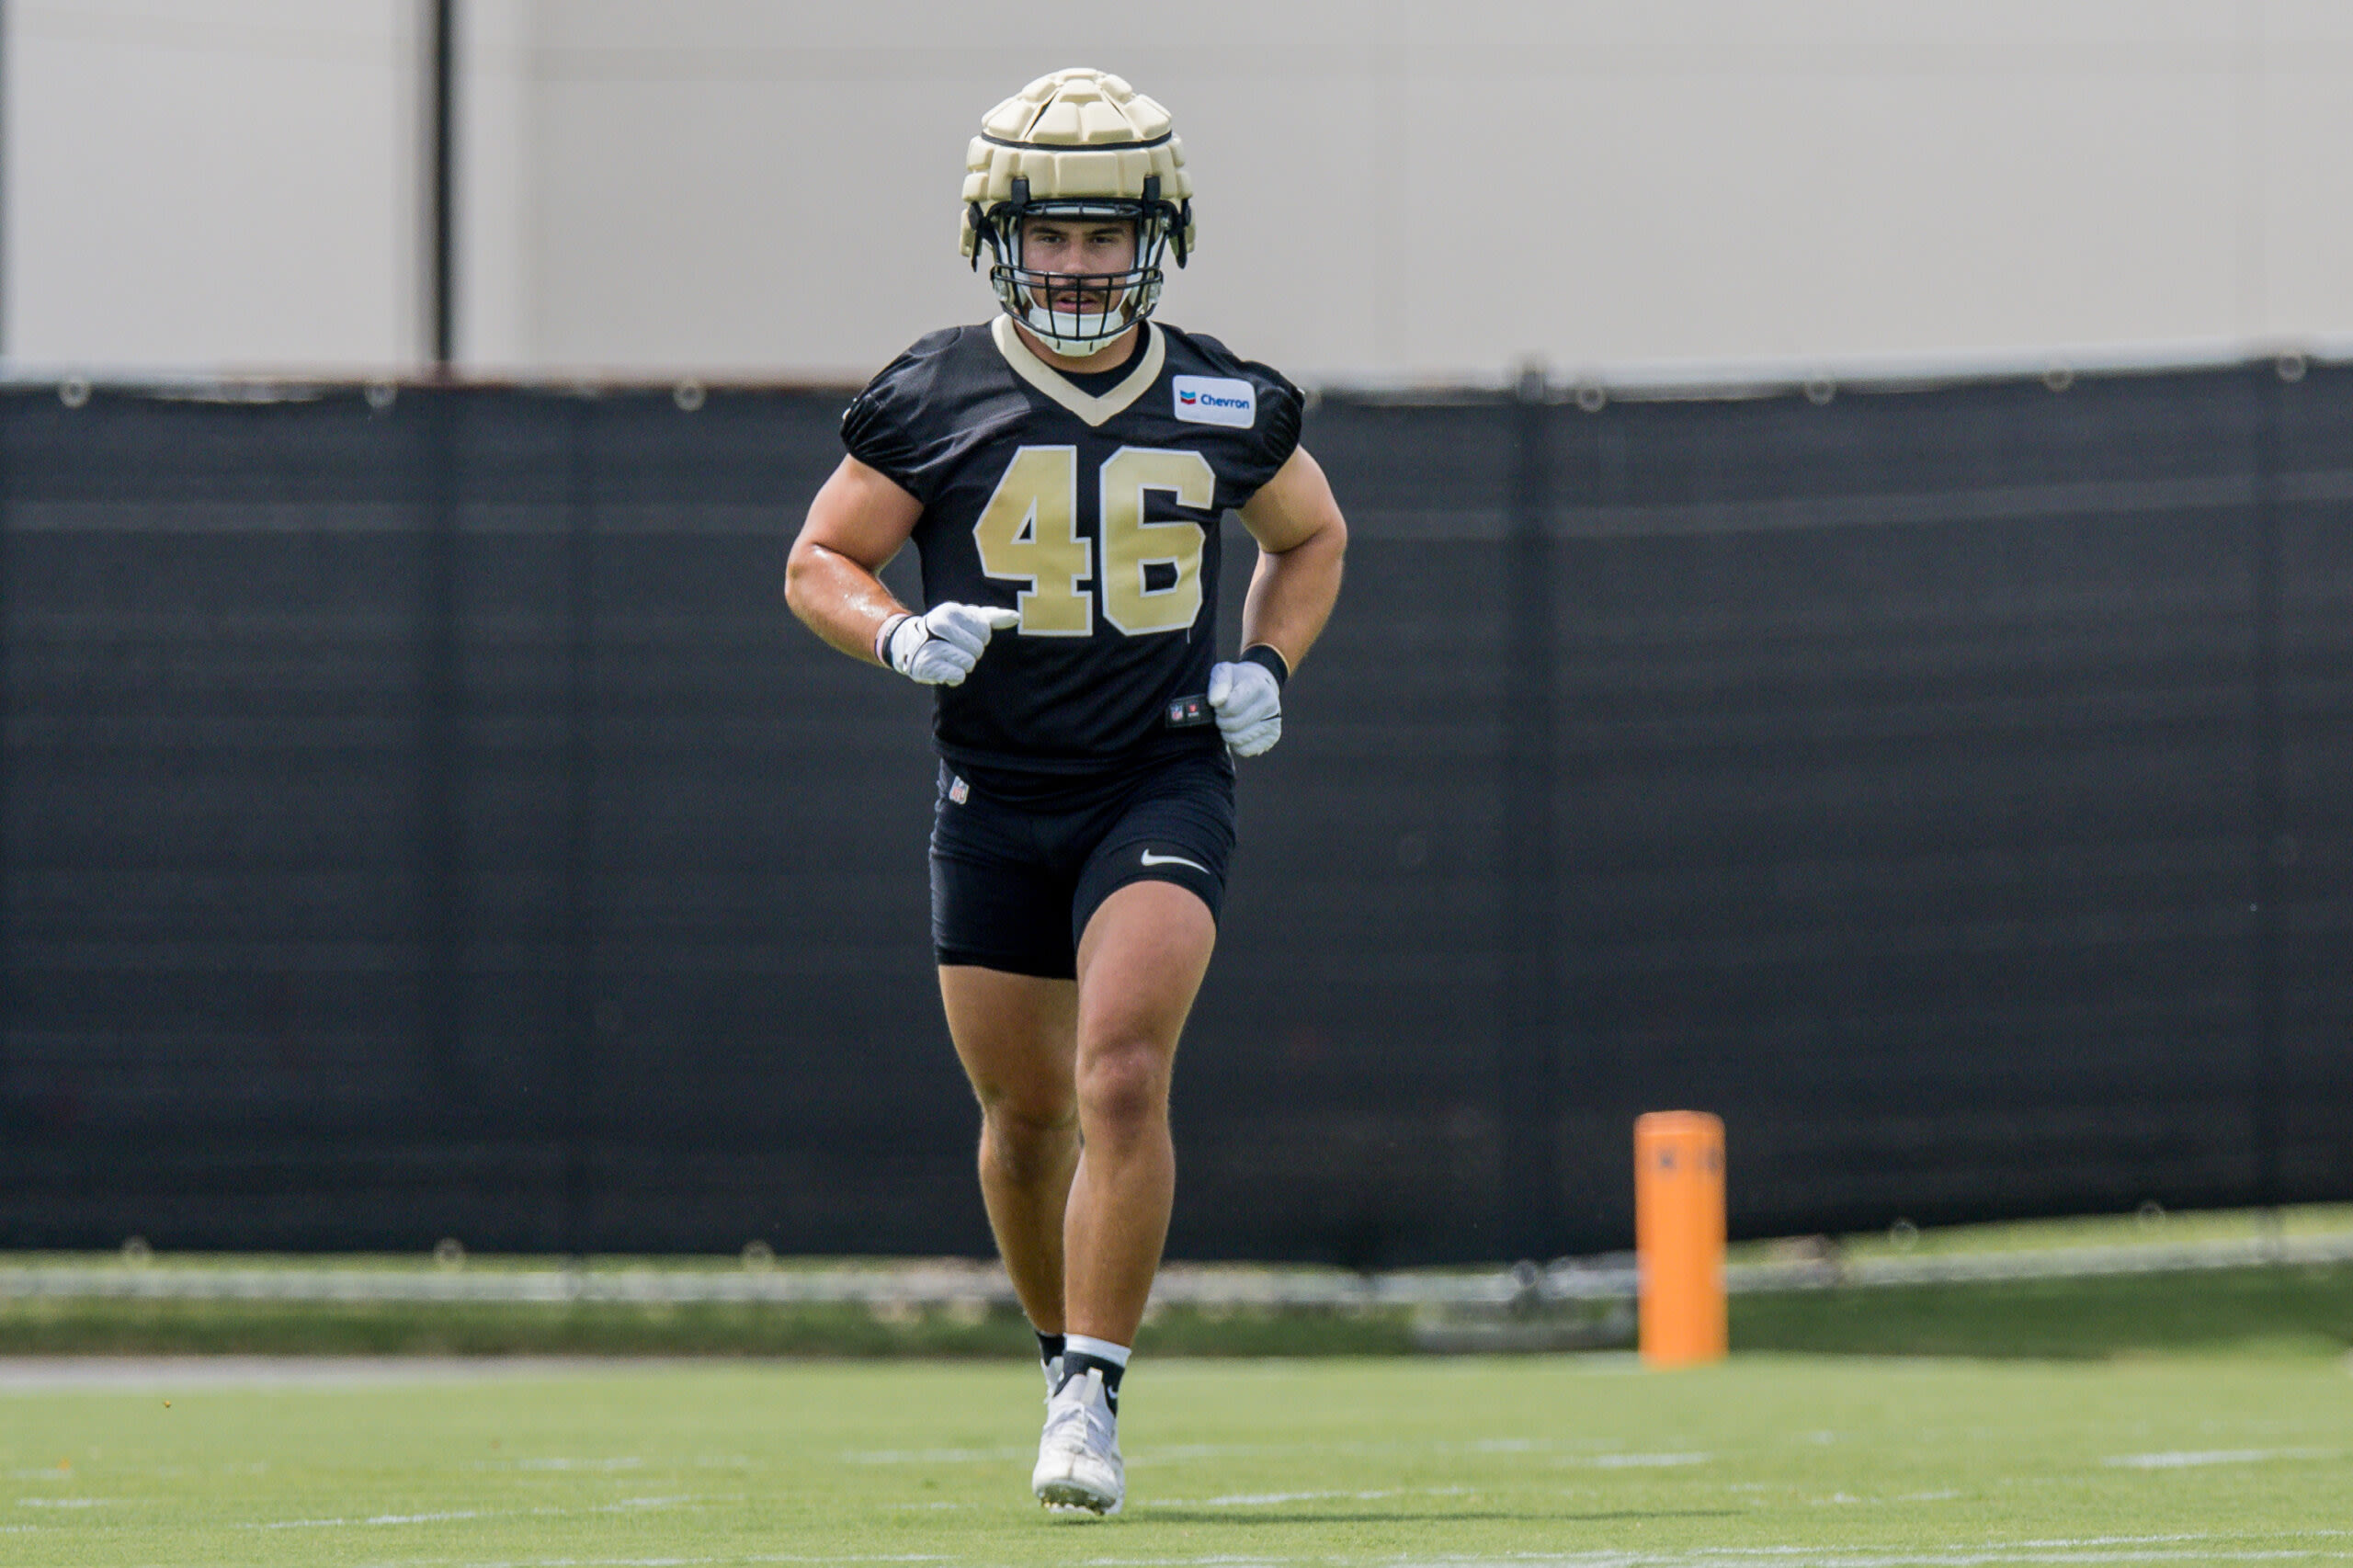 Countdown to Kickoff: Adam Prentice is Saints Player of Day 46